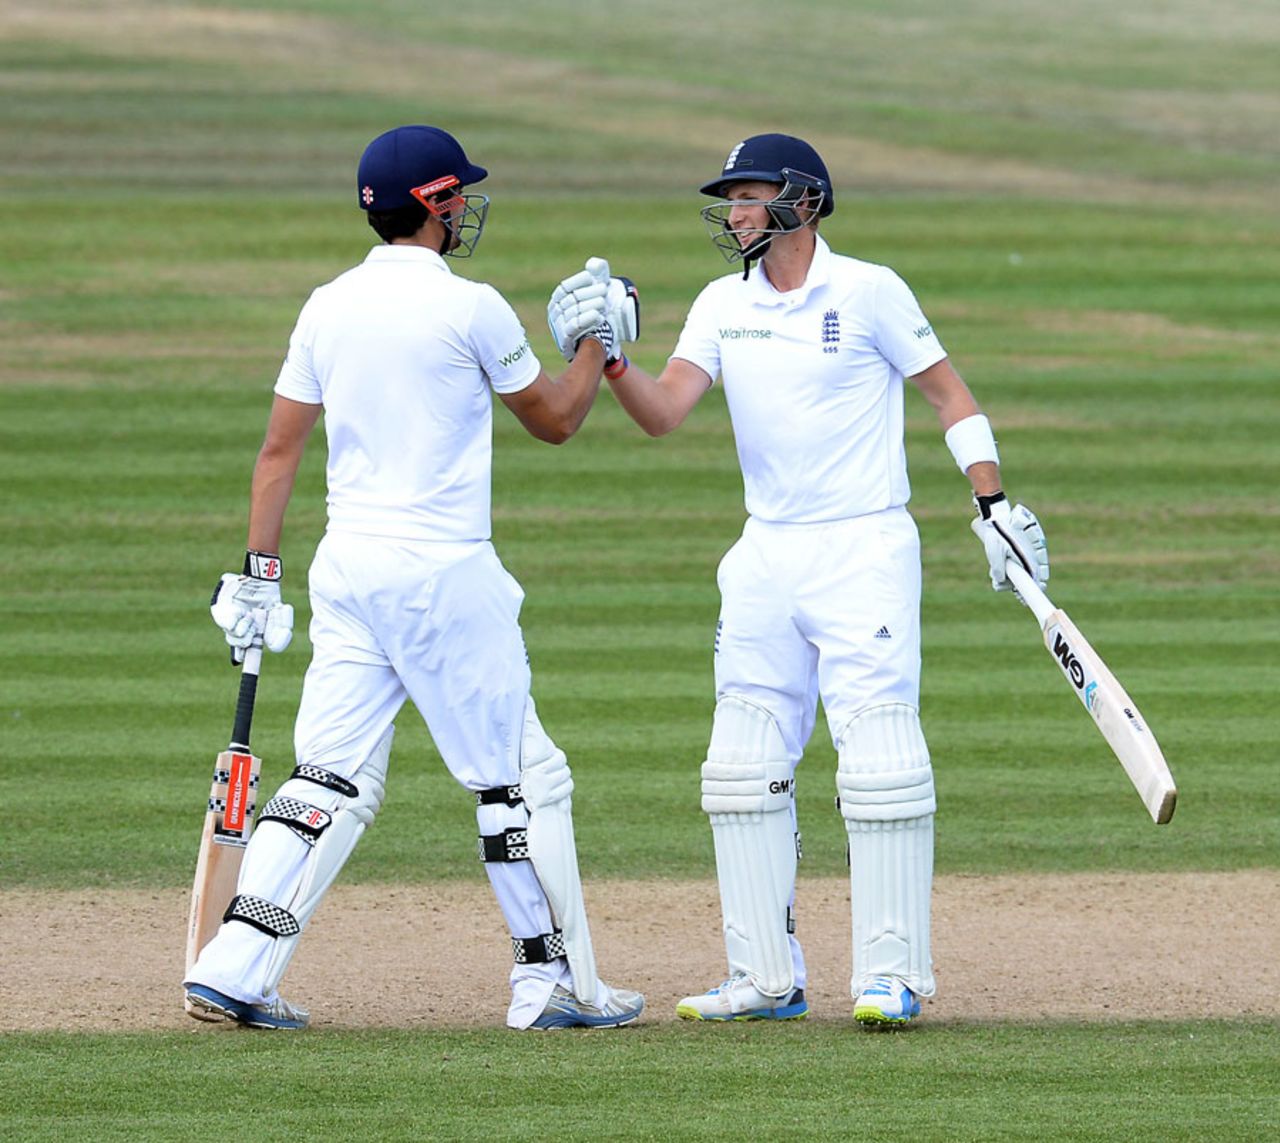 Alastair Cook congratulates Joe Root on his fifty, England v India, 3rd Investec Test, Ageas Bowl, 4th day, July 30, 2014